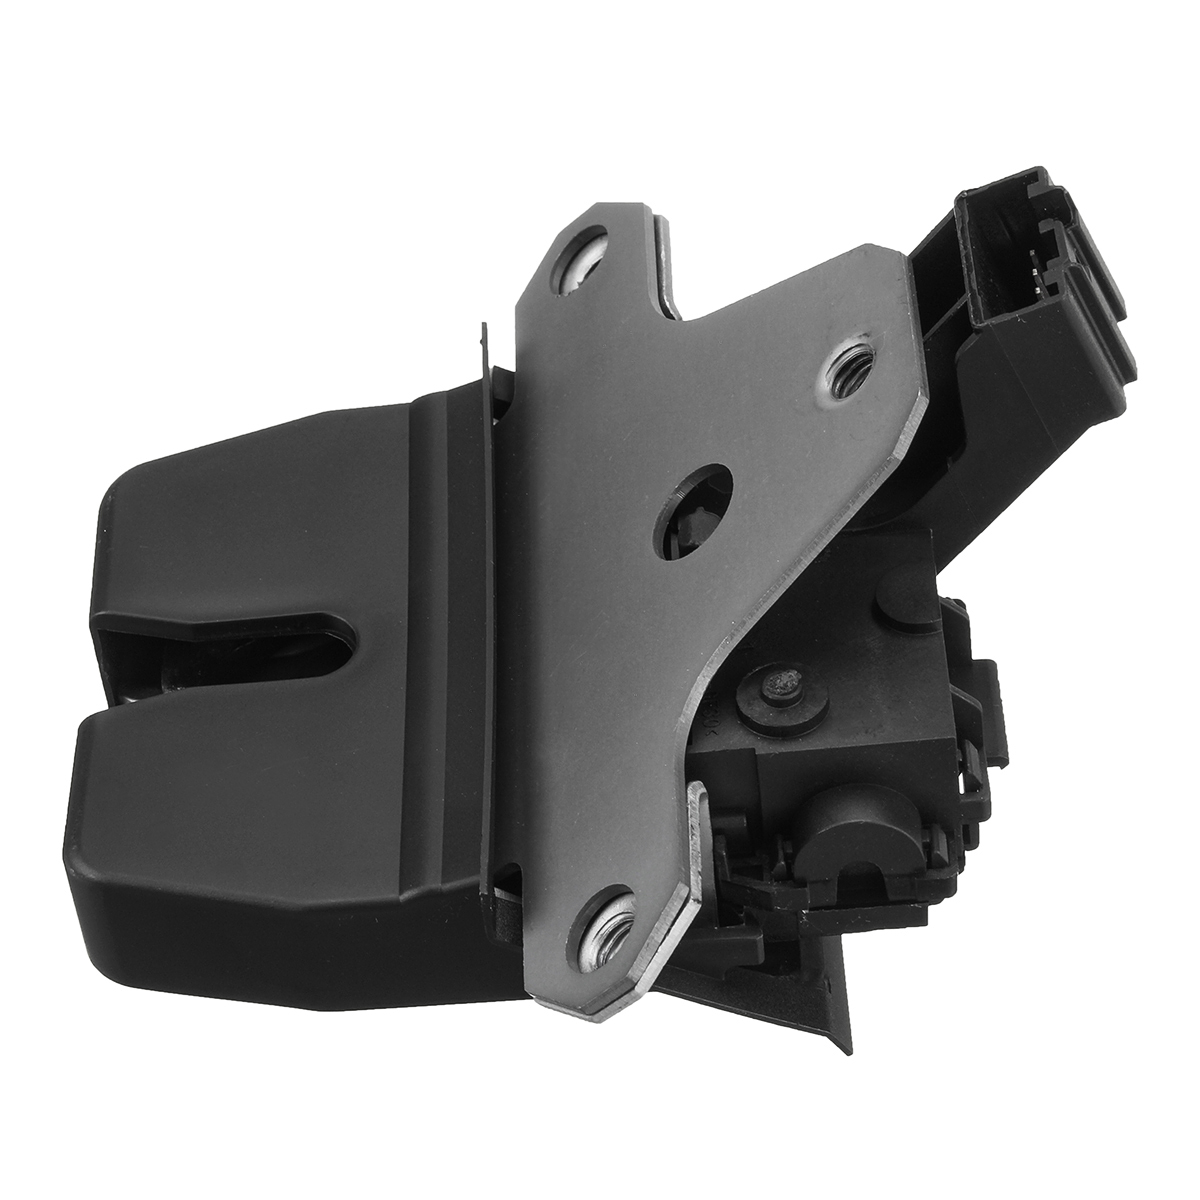 Tailgate Boot Car Lock Trunk Lock Latch for Ford Focus Mk2 Kuga C-Max S-Max Mondeo Galaxy